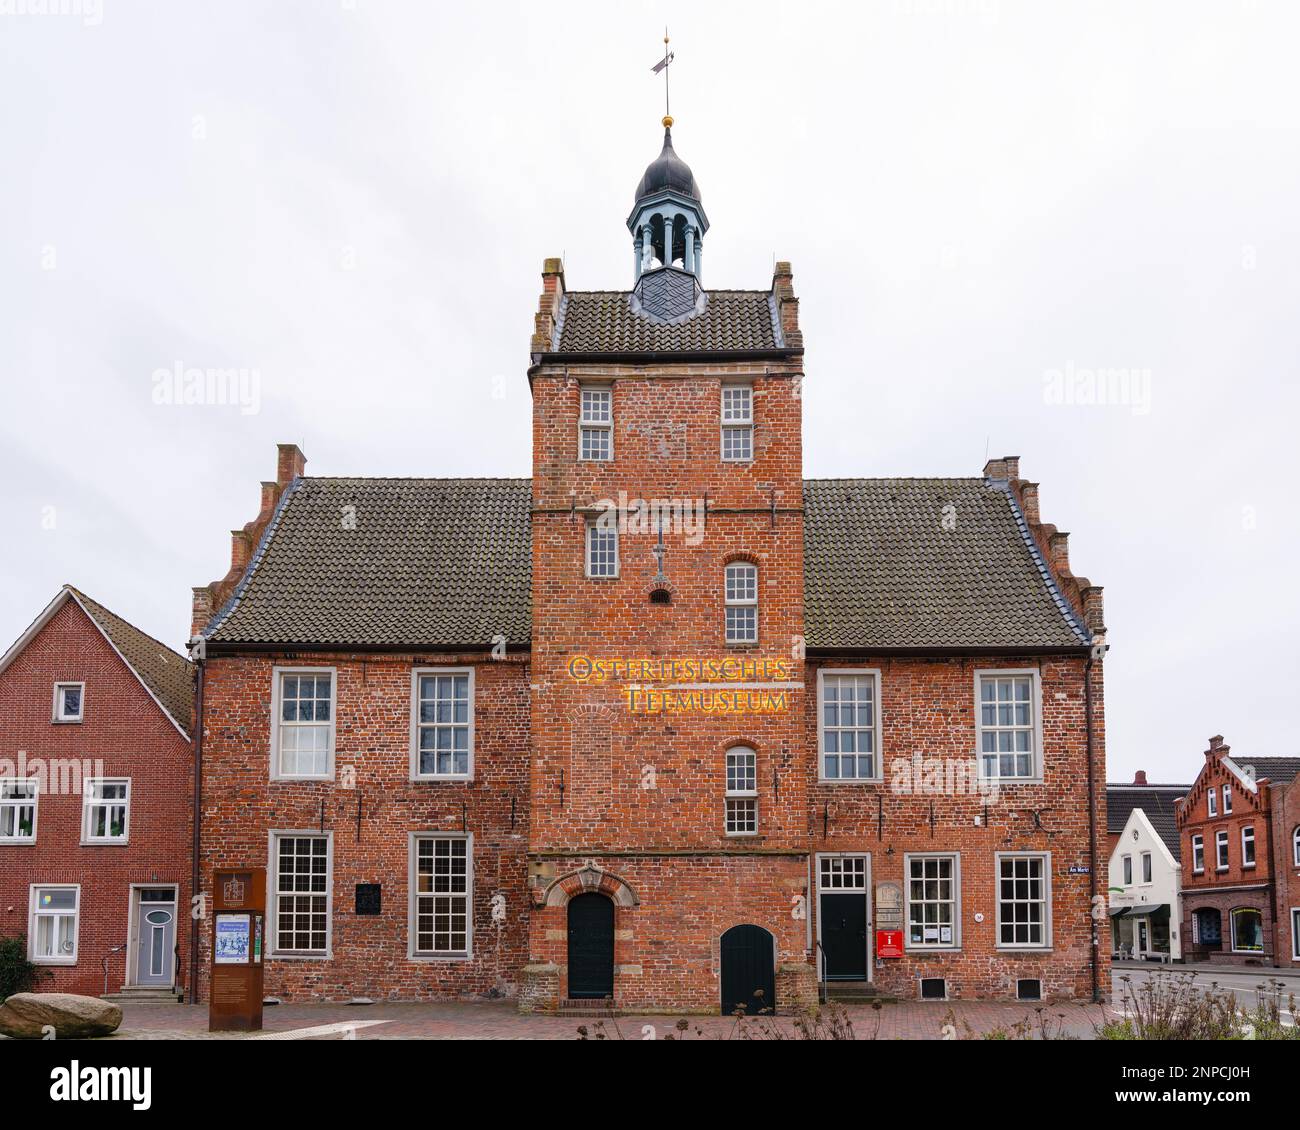 Ostfriesisches Teemuseum, East Frisian Tea Museum in Norden, Germany. Old Town Hall, historic red brick building in East Frisia. Stock Photo